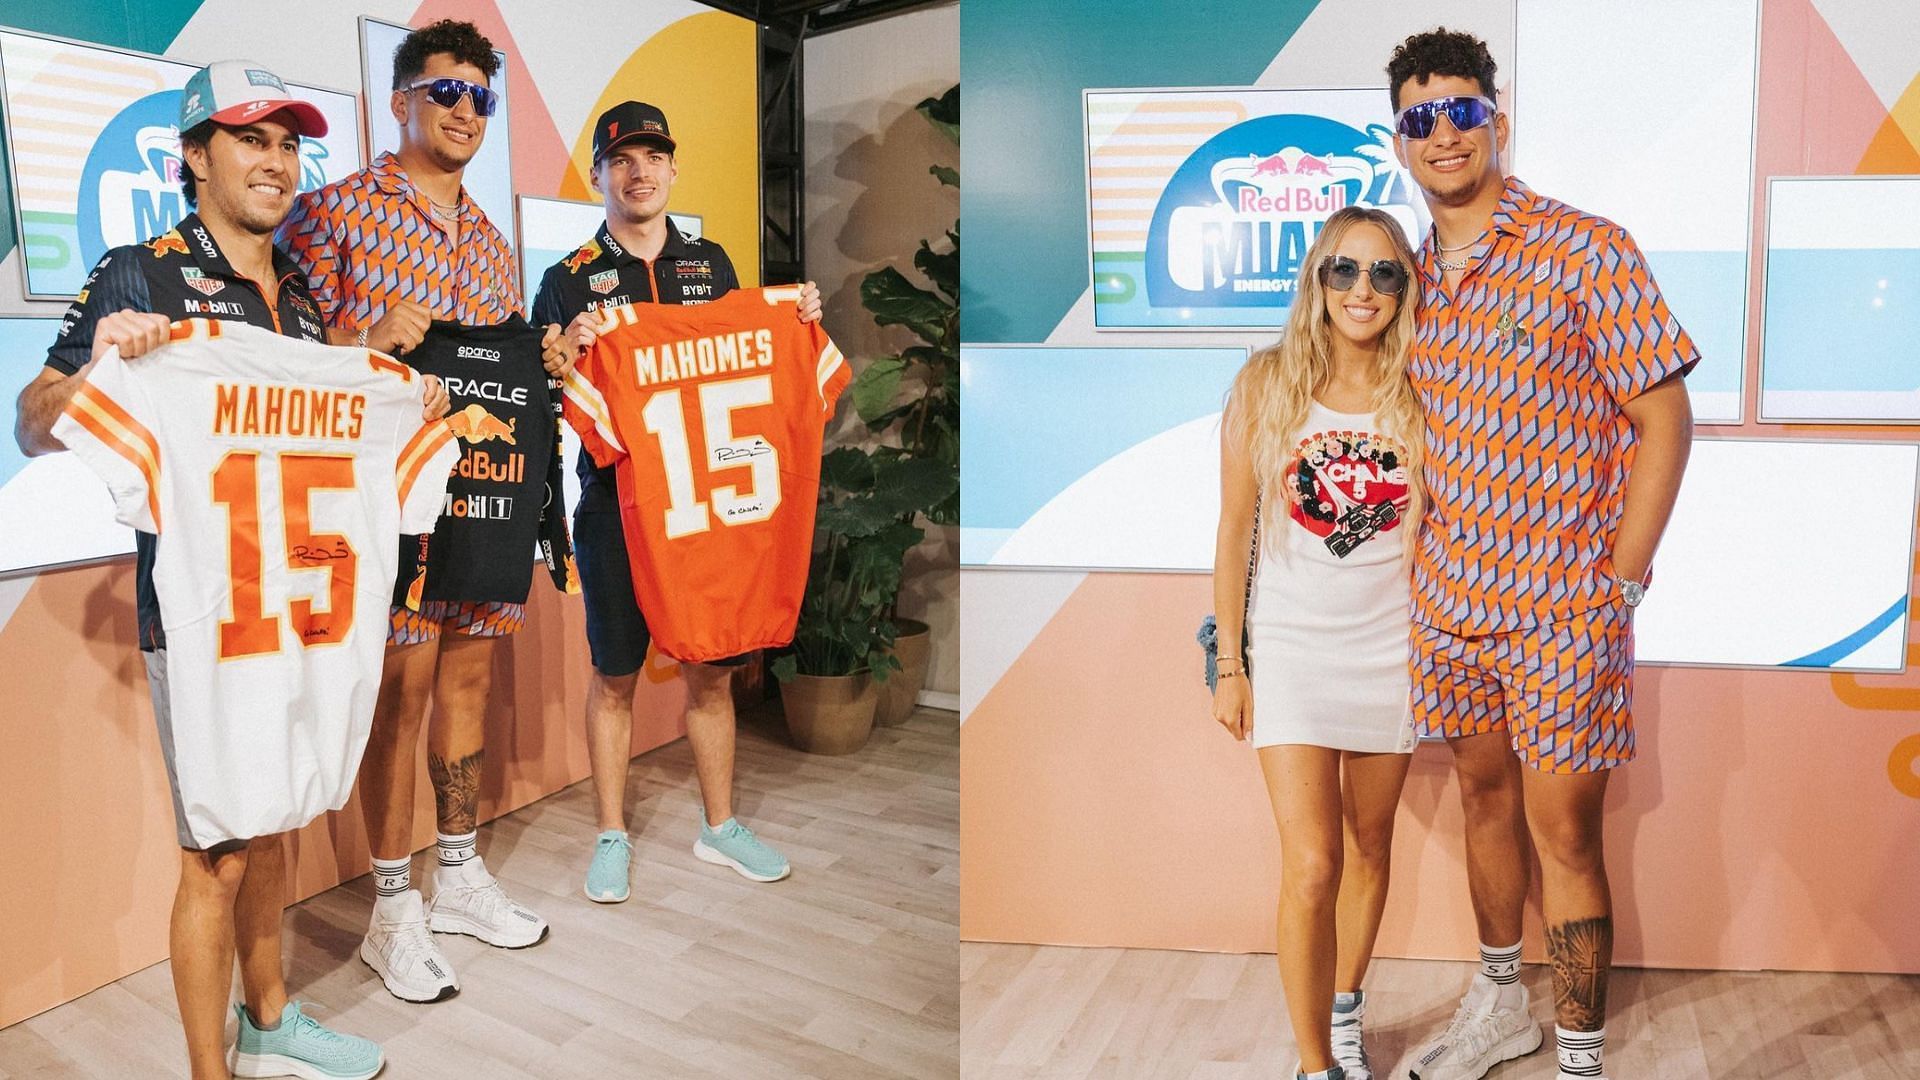 Patrick Mahomes went to the 2023 Miami Grand Prix with his wife, Brittany Lynne, and gave his jersey to Max Verstappen and Sergio Perez. (Image credit: Instagram.com/patrickmahomes)